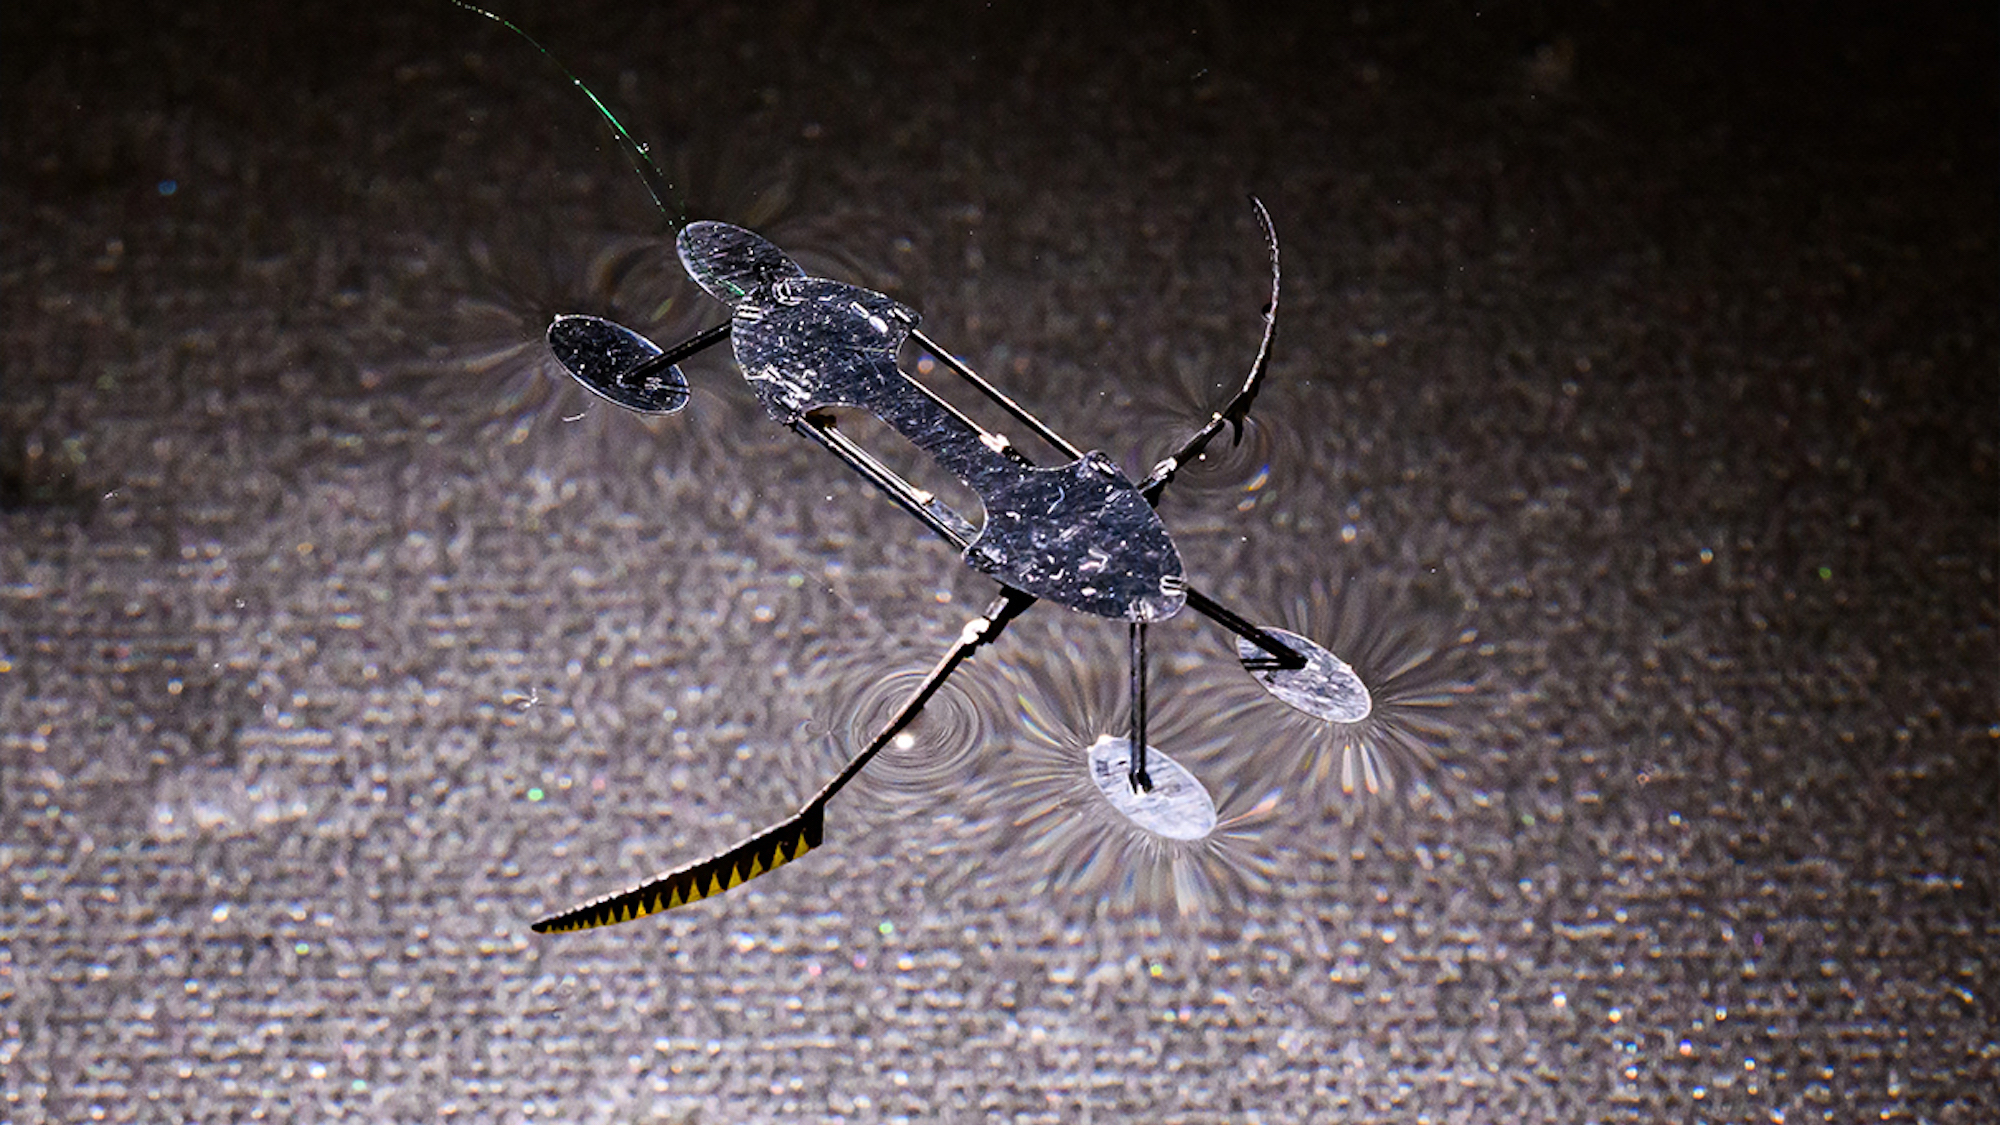 These micro-robots were inspired by mini-bugs and water striders